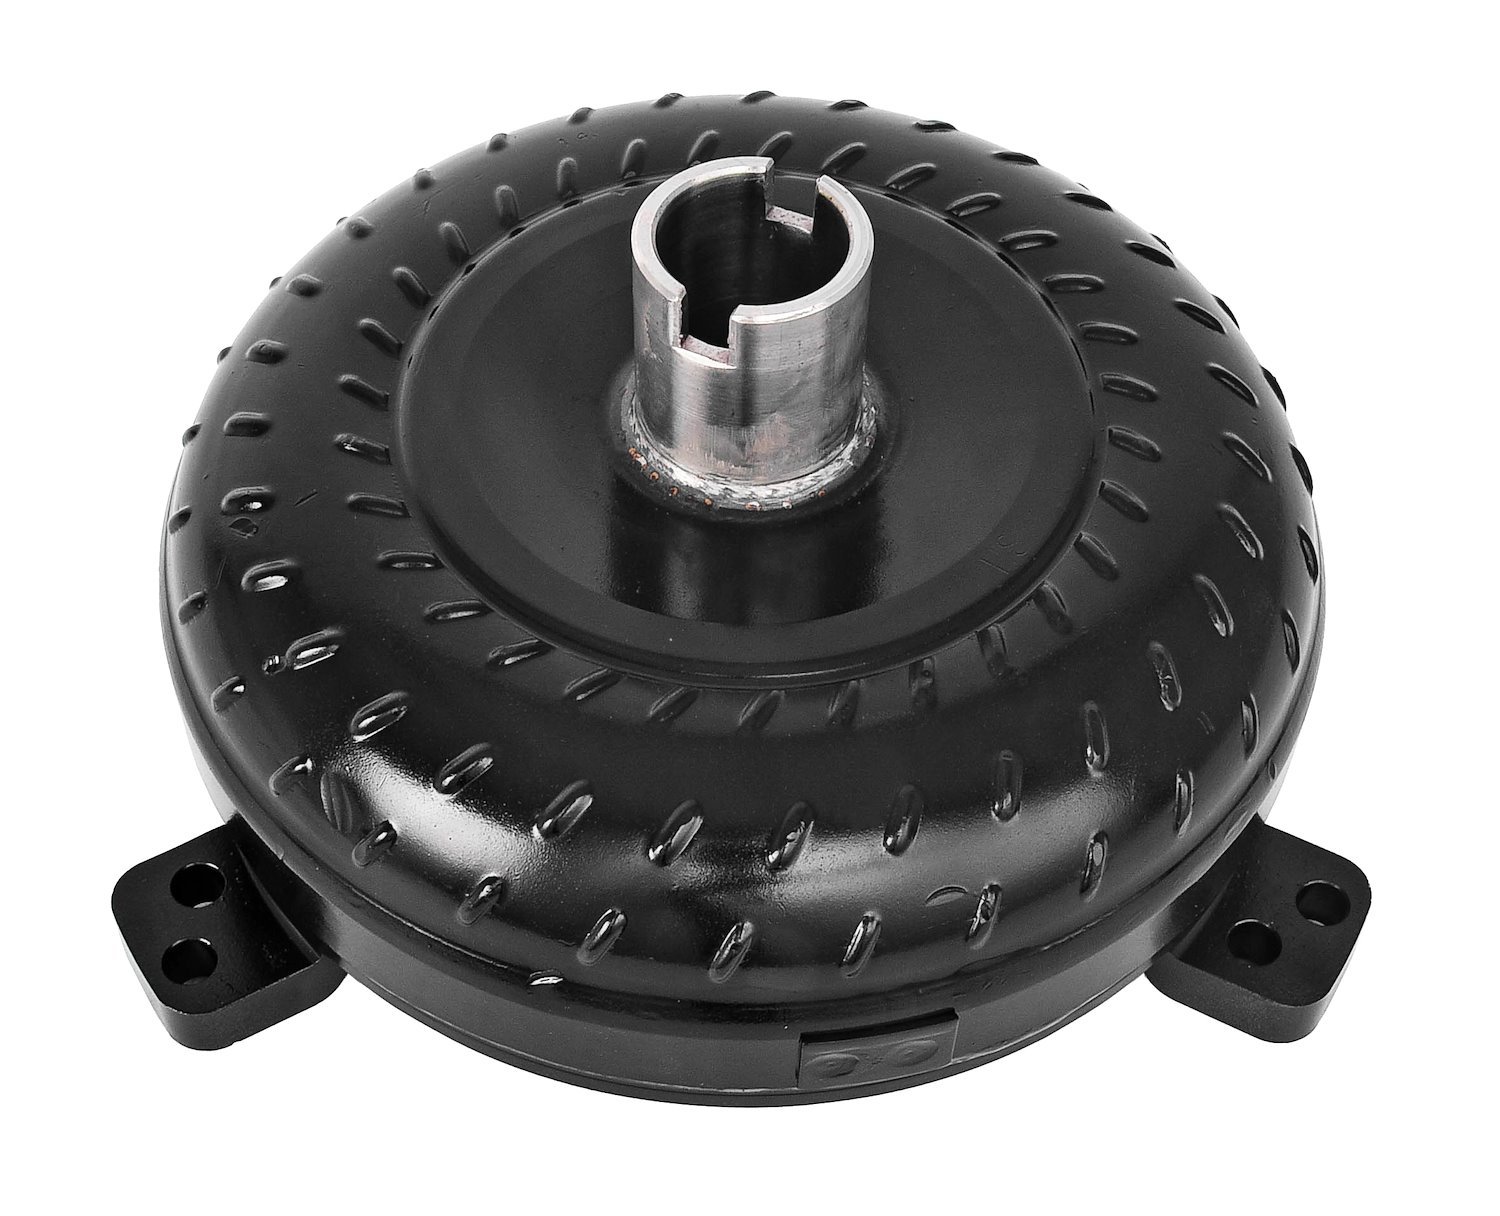 XHD Torque Converter for GM TH350/TH400/Powerglide [3500-3800 RPM Stall Speed]